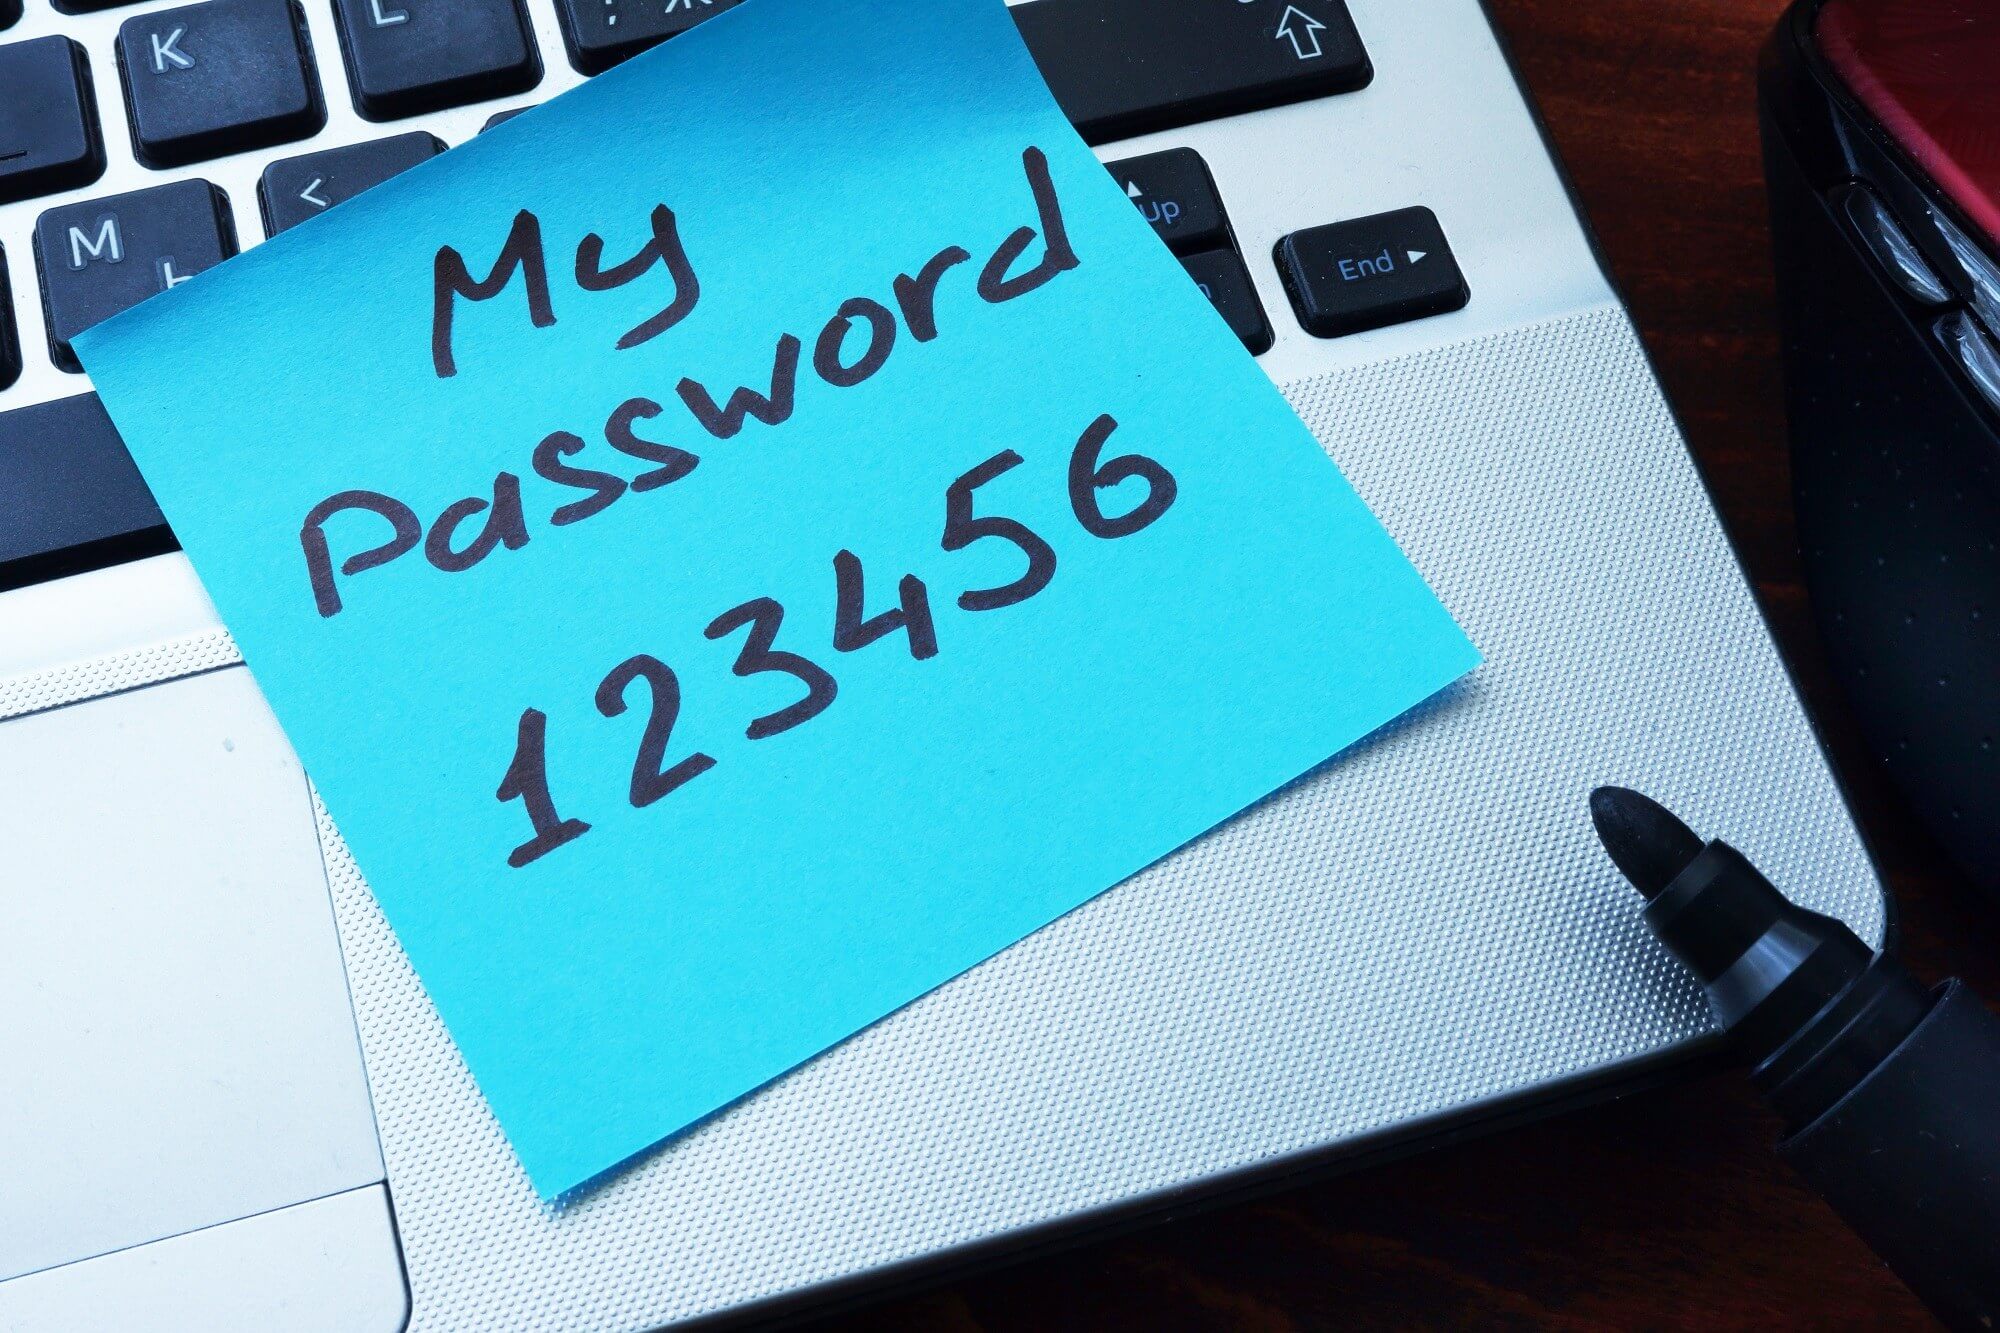 Do any of your devices use these passwords? You could be at risk from hackers